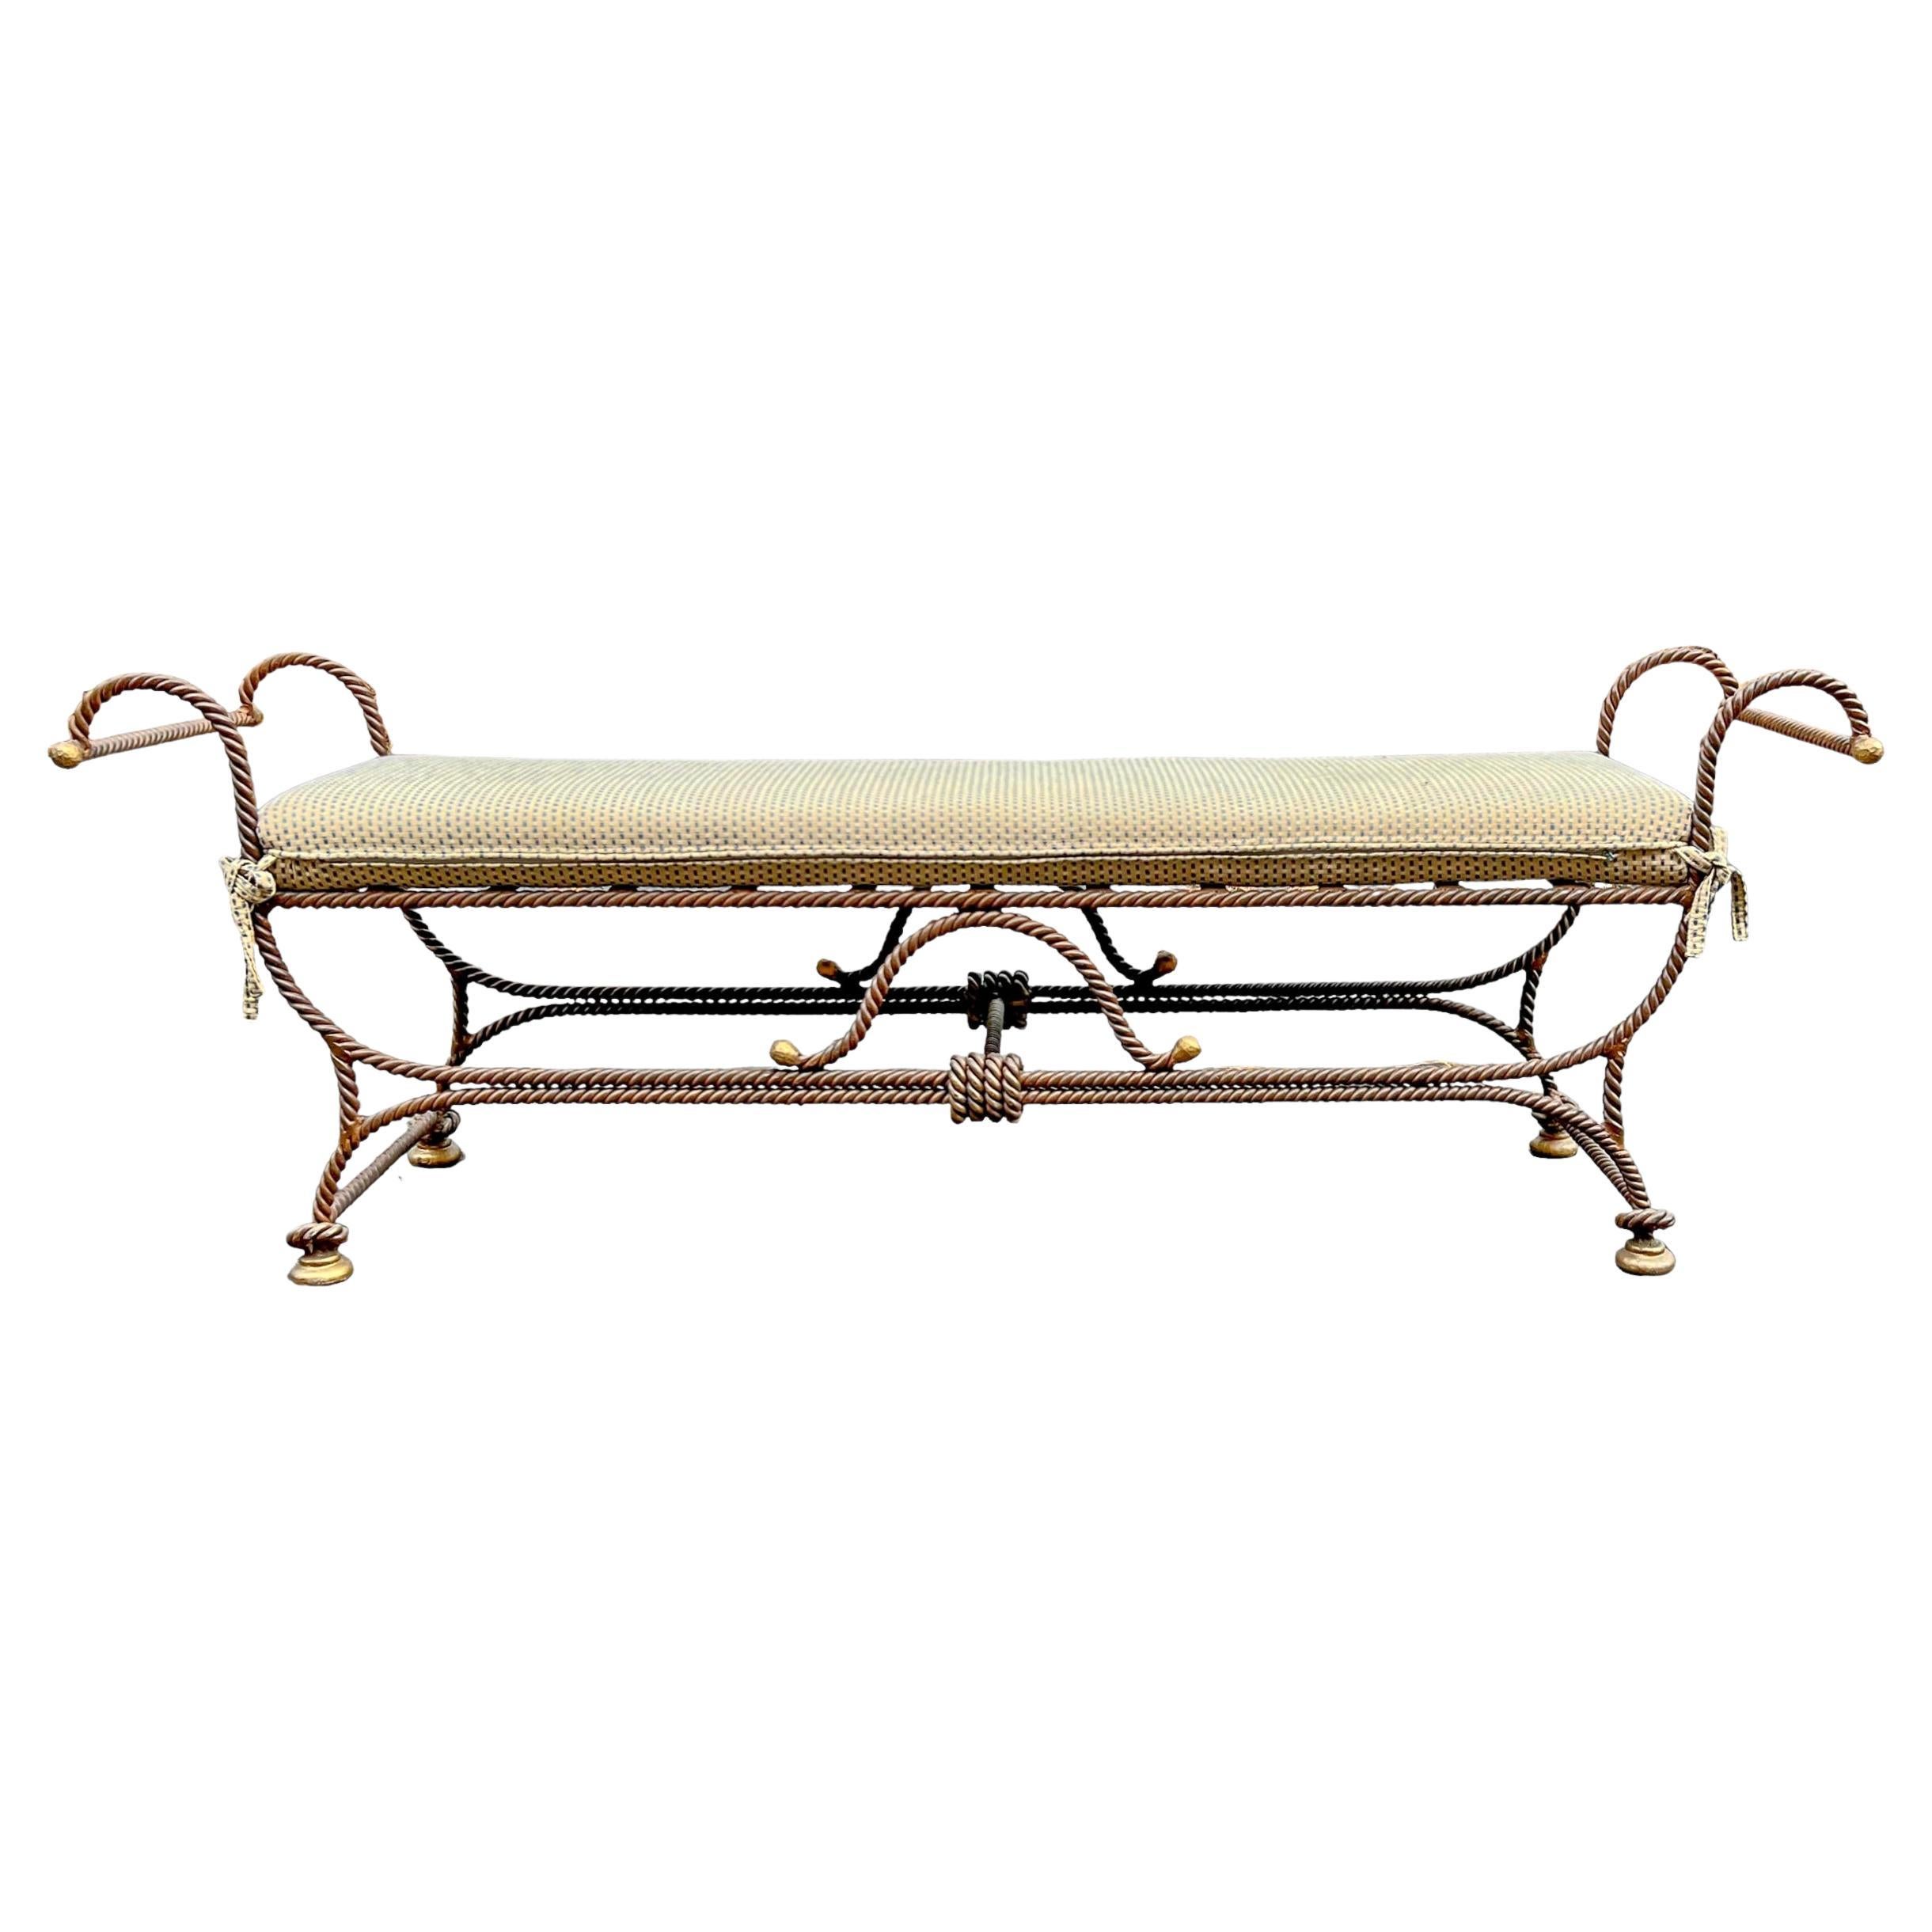 Hollywood Regency Neo-Classical Style Wrought Iron Bench W/ Rope / Tassel Motif For Sale